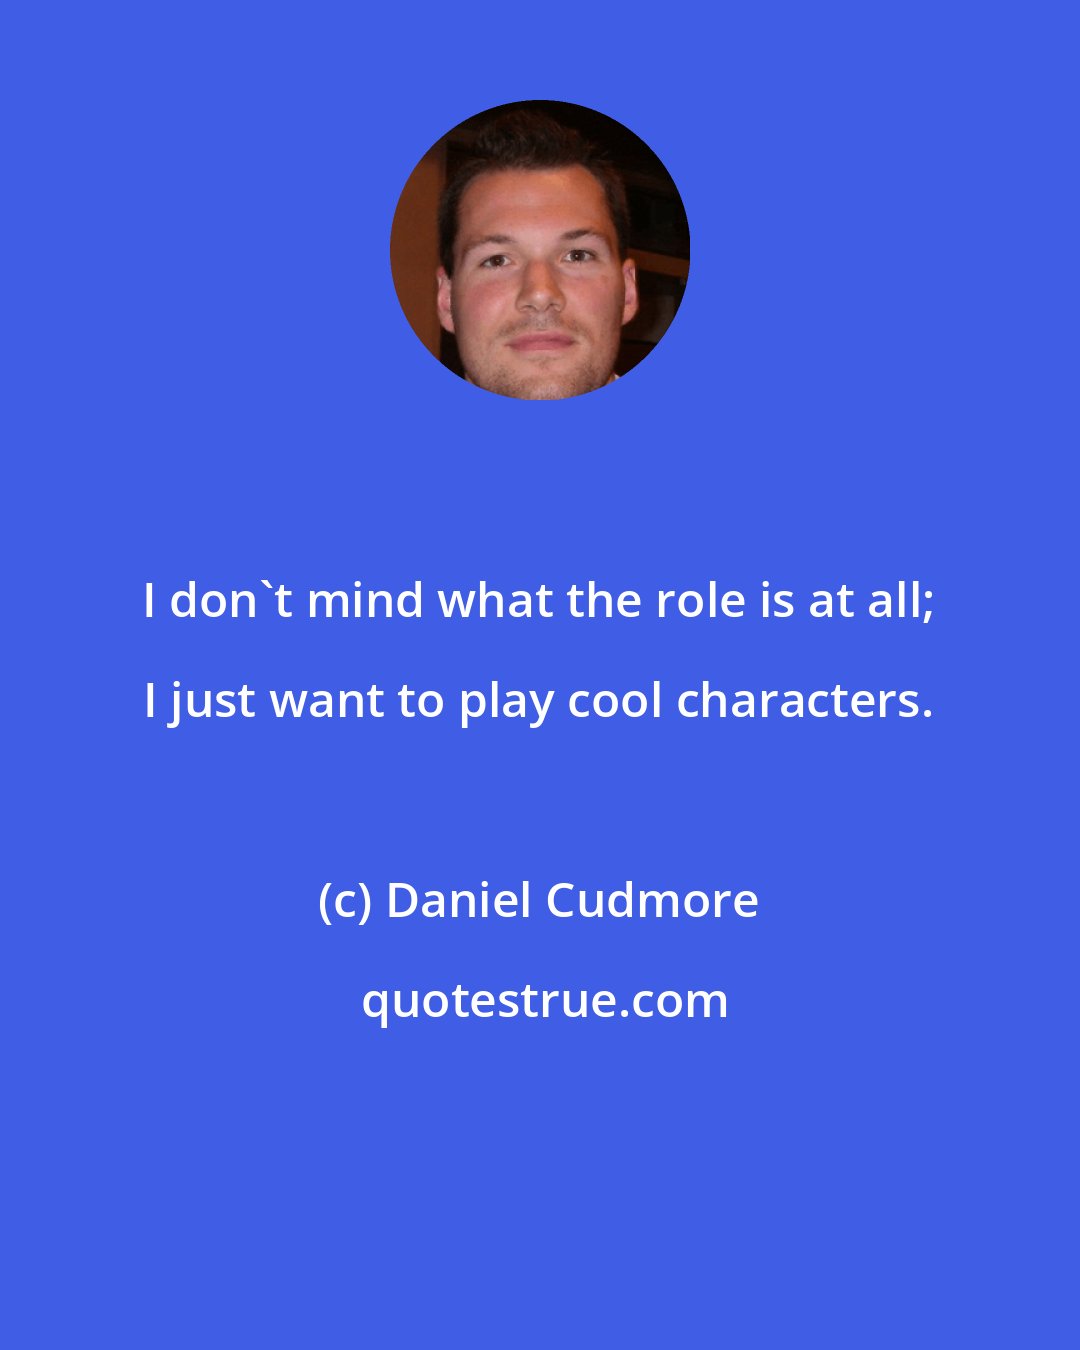 Daniel Cudmore: I don't mind what the role is at all; I just want to play cool characters.